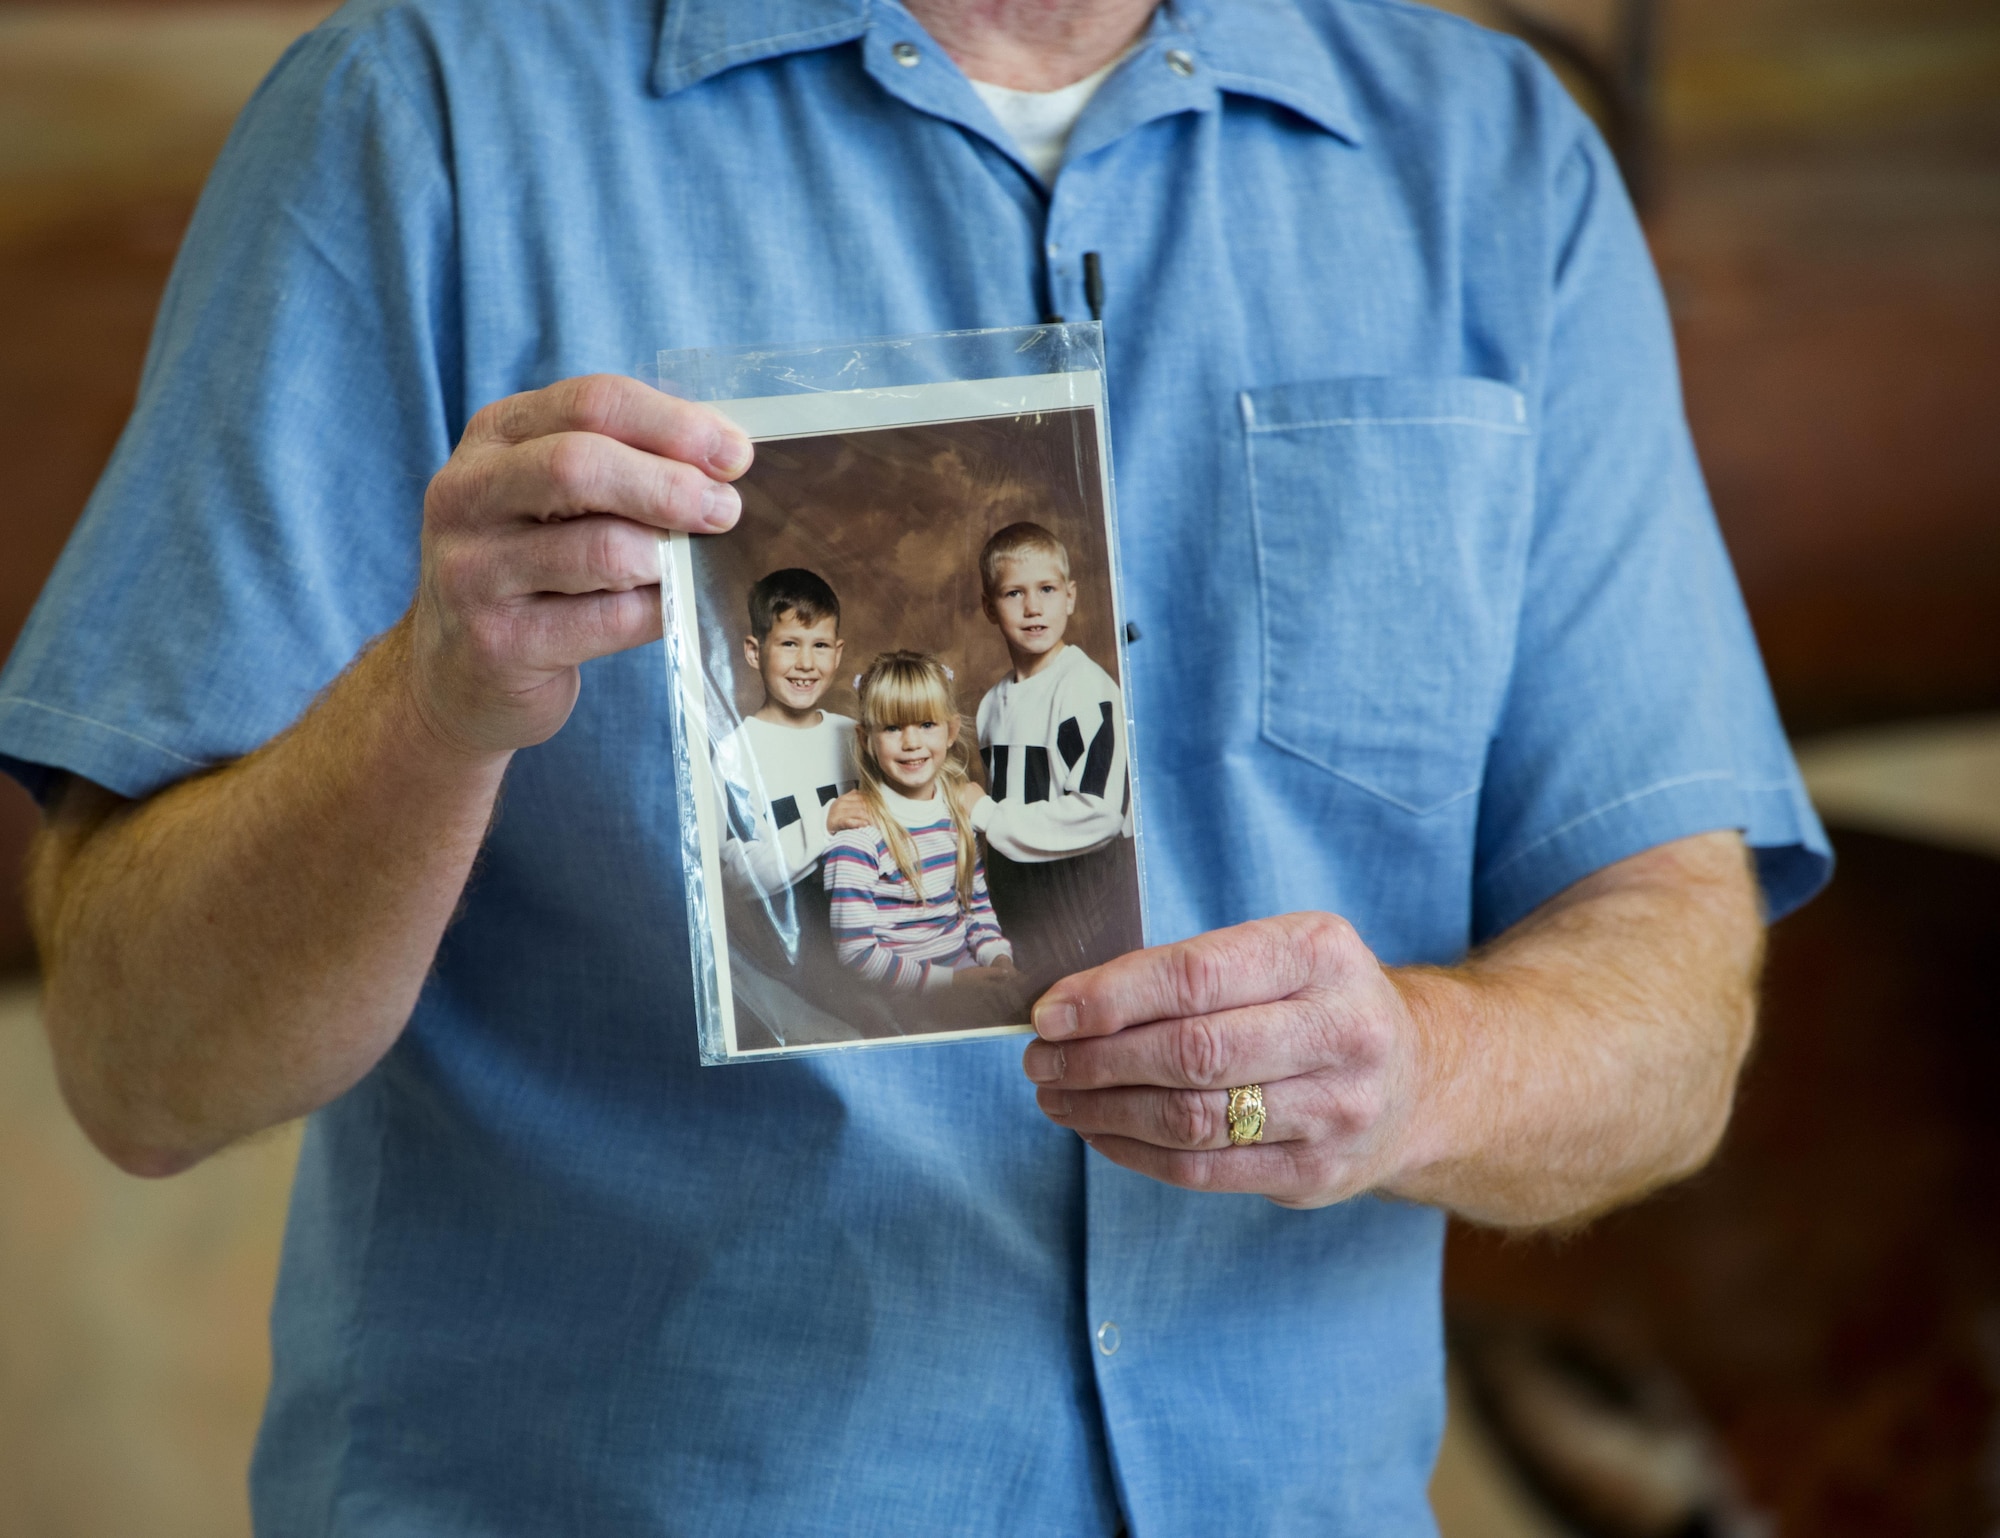 An inmate from the California Medical Facility shares a personal story about his incarceration and shows a photograph of his children during the time he was imprisoned at CMF, in Vacaville, Calif., Sept. 15, 2016. (U.S. Air Force photo by Staff Sgt. Charles Rivezzo)